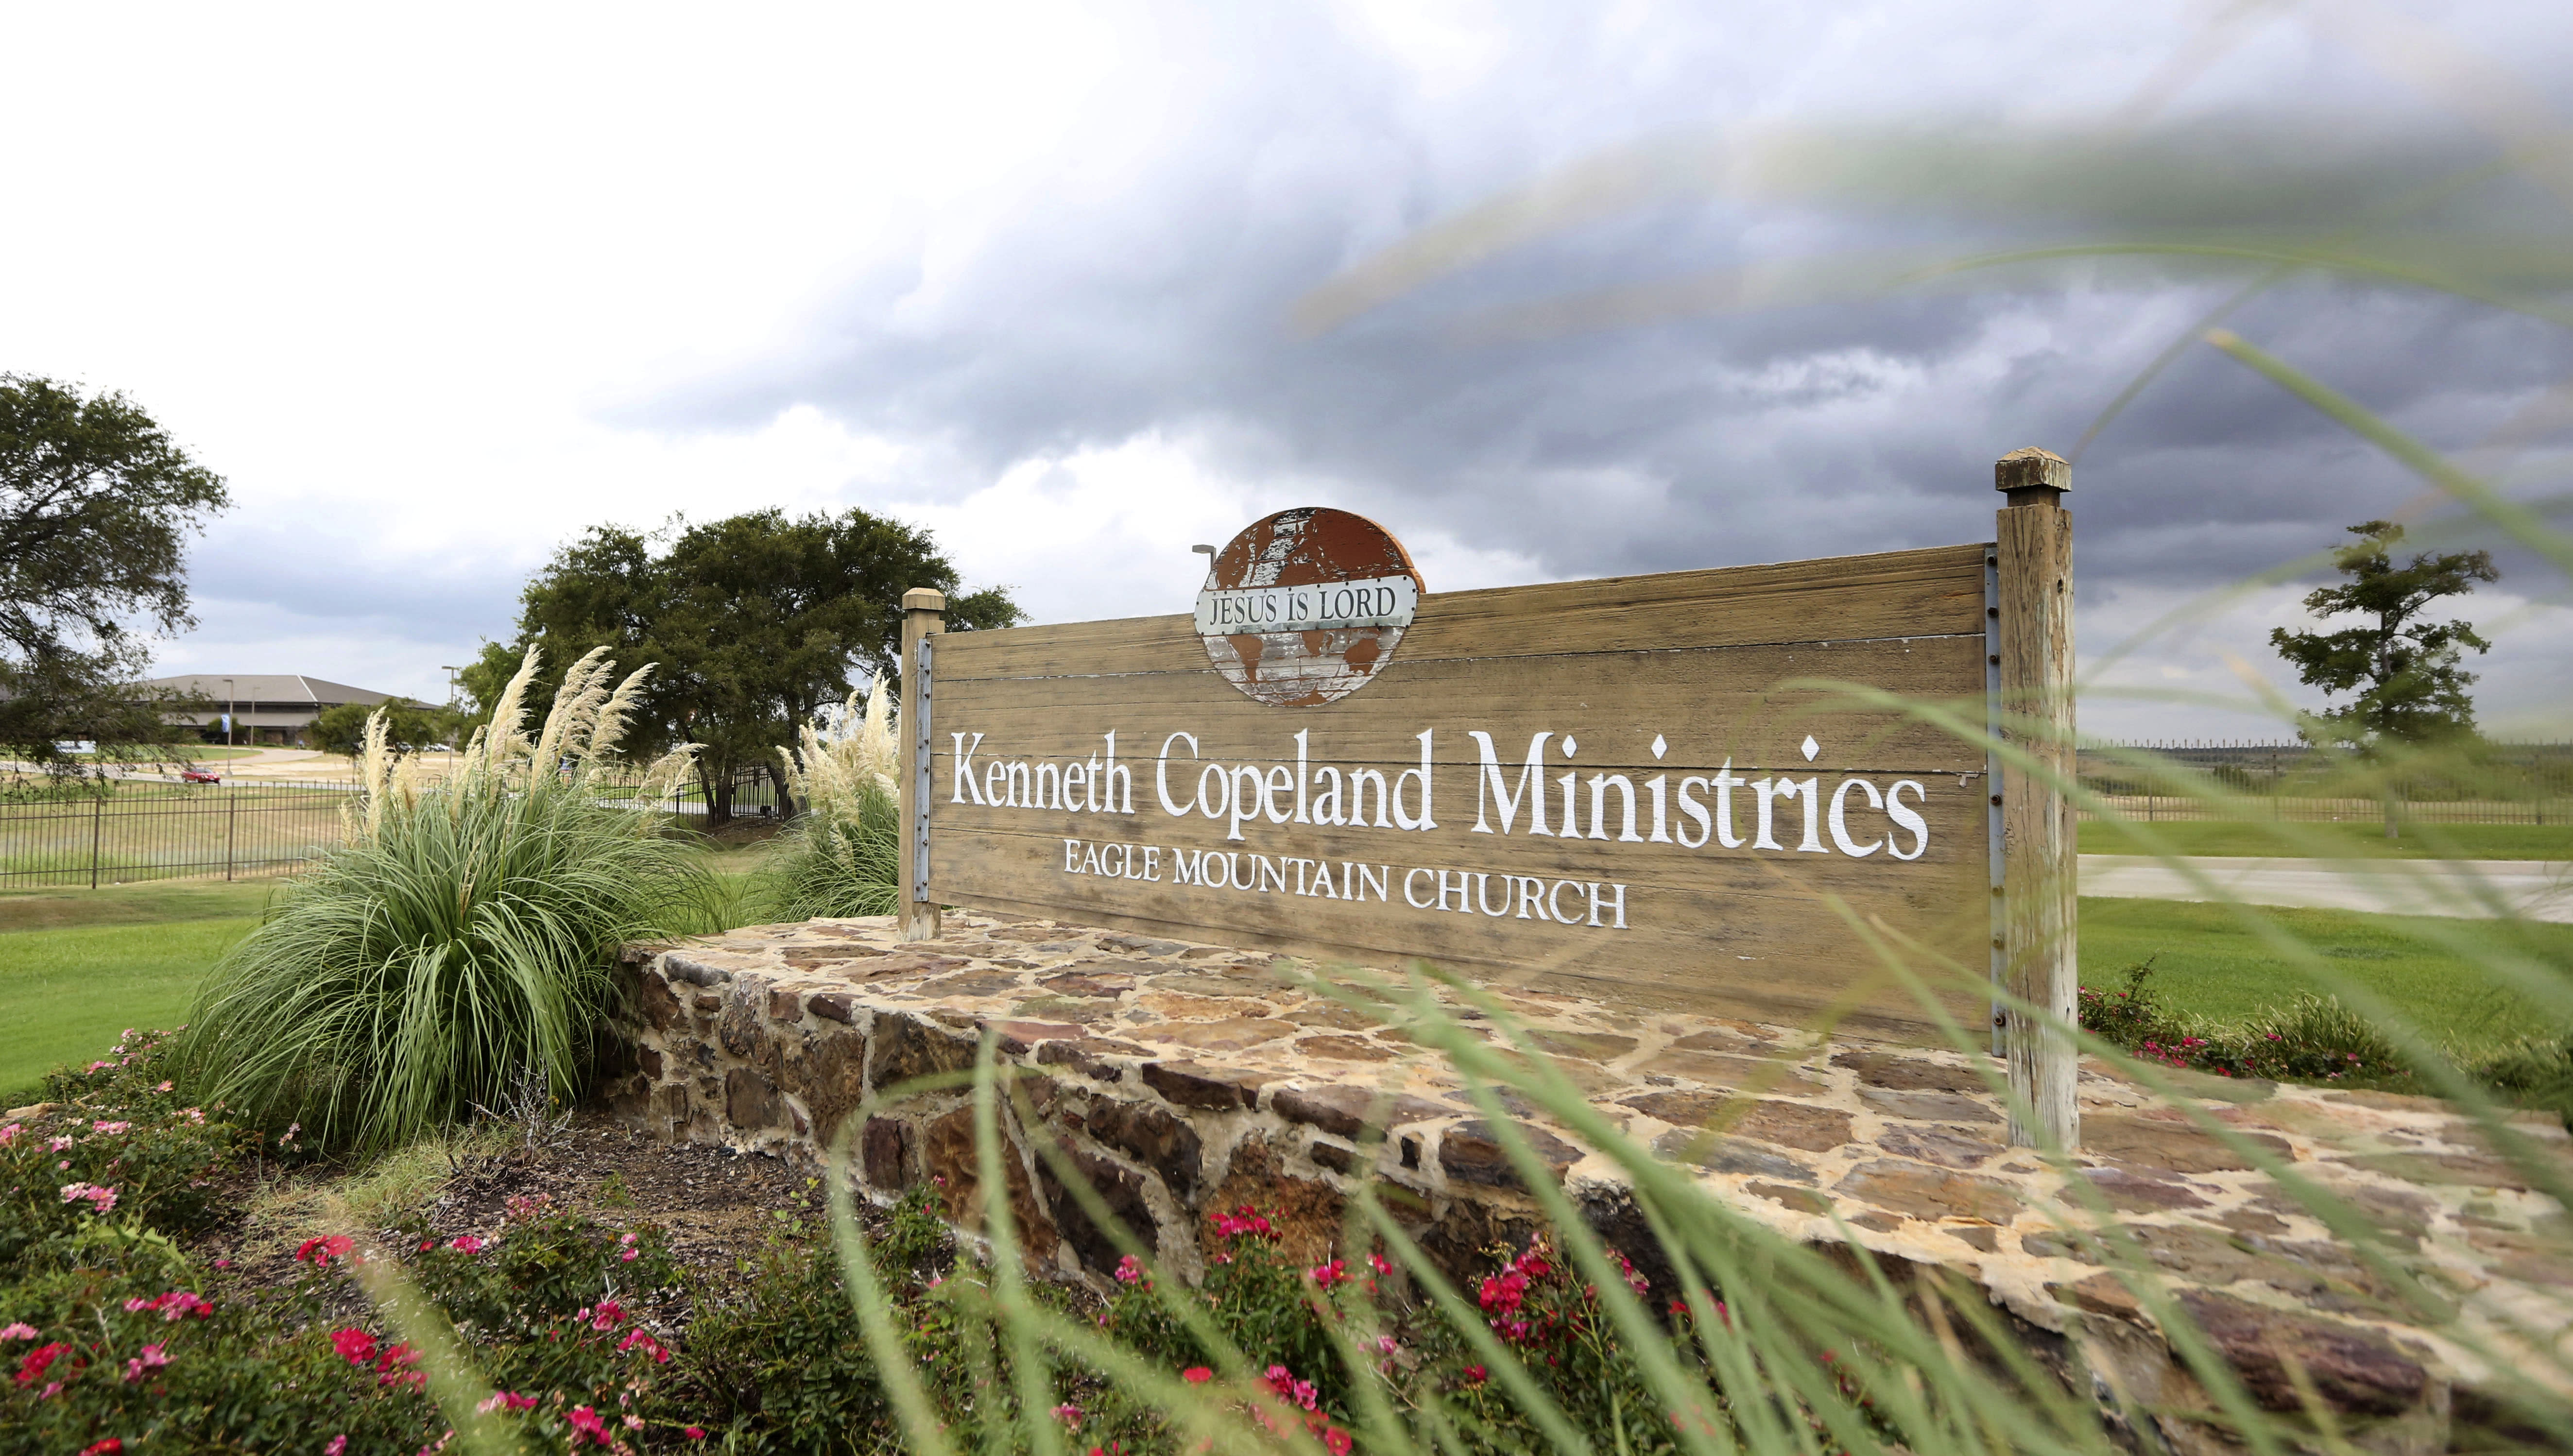 https://www.kcm.org/about-us/kenneth-copeland-ministries-brief-history